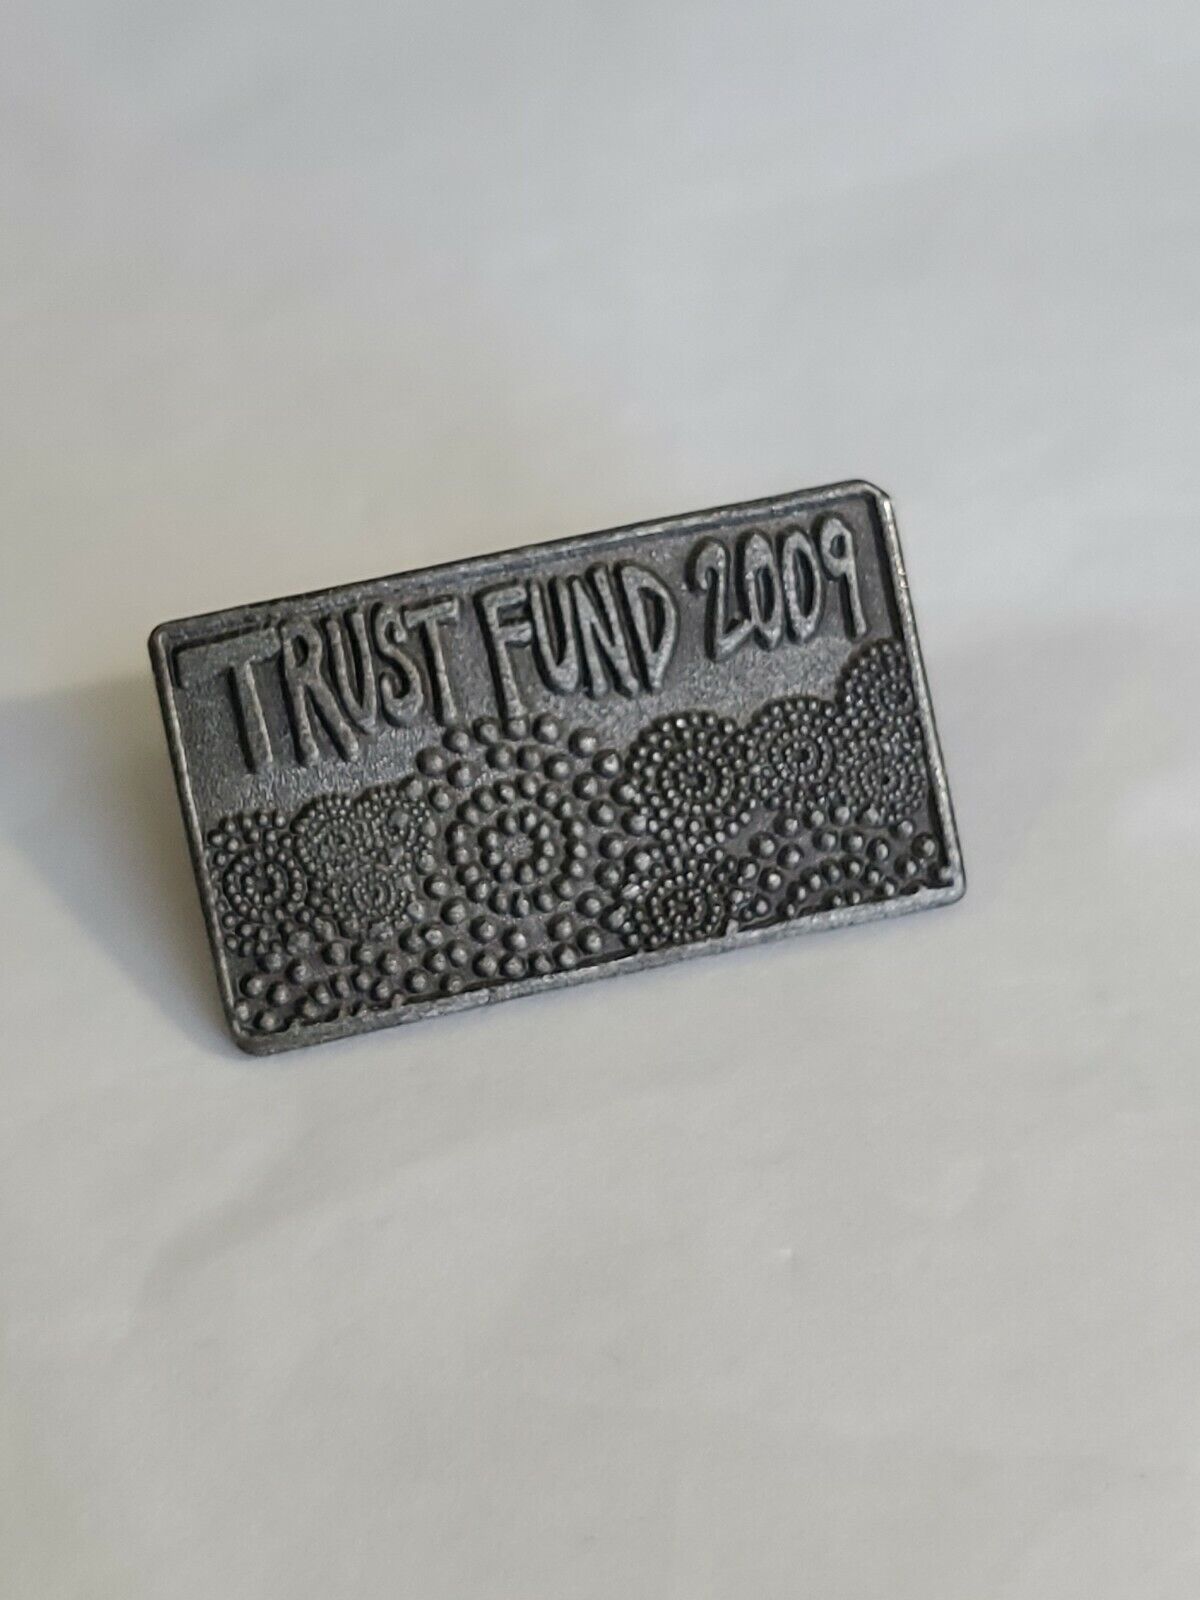 Trust Fund 2009 Lapel Pin Tie Tack With Chain And Bar By Majestic Jewelers